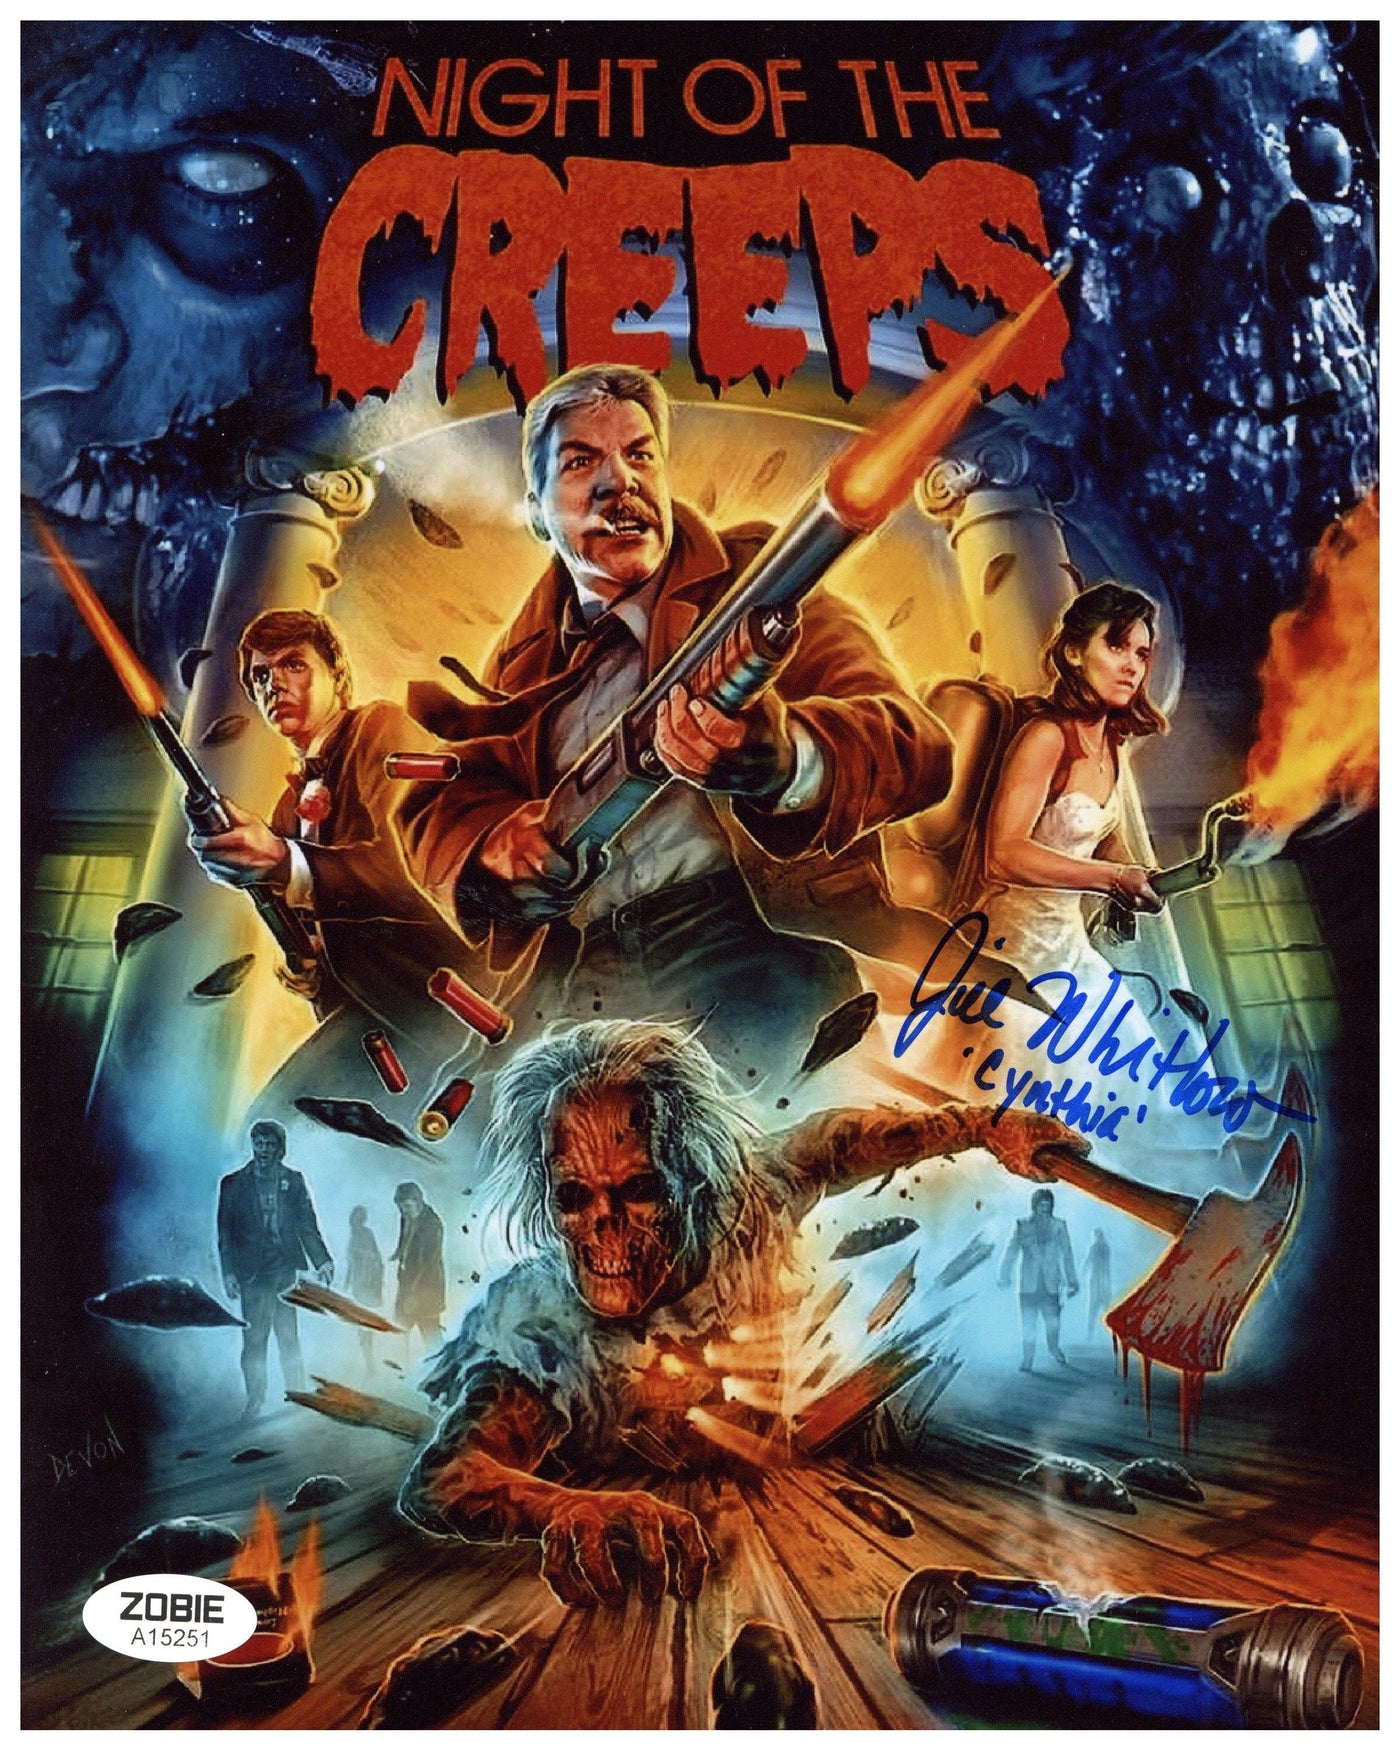 Jill Whitlow Signed 8x10 Photo Night of the Creeps Horror Autographed Zobie COA 2